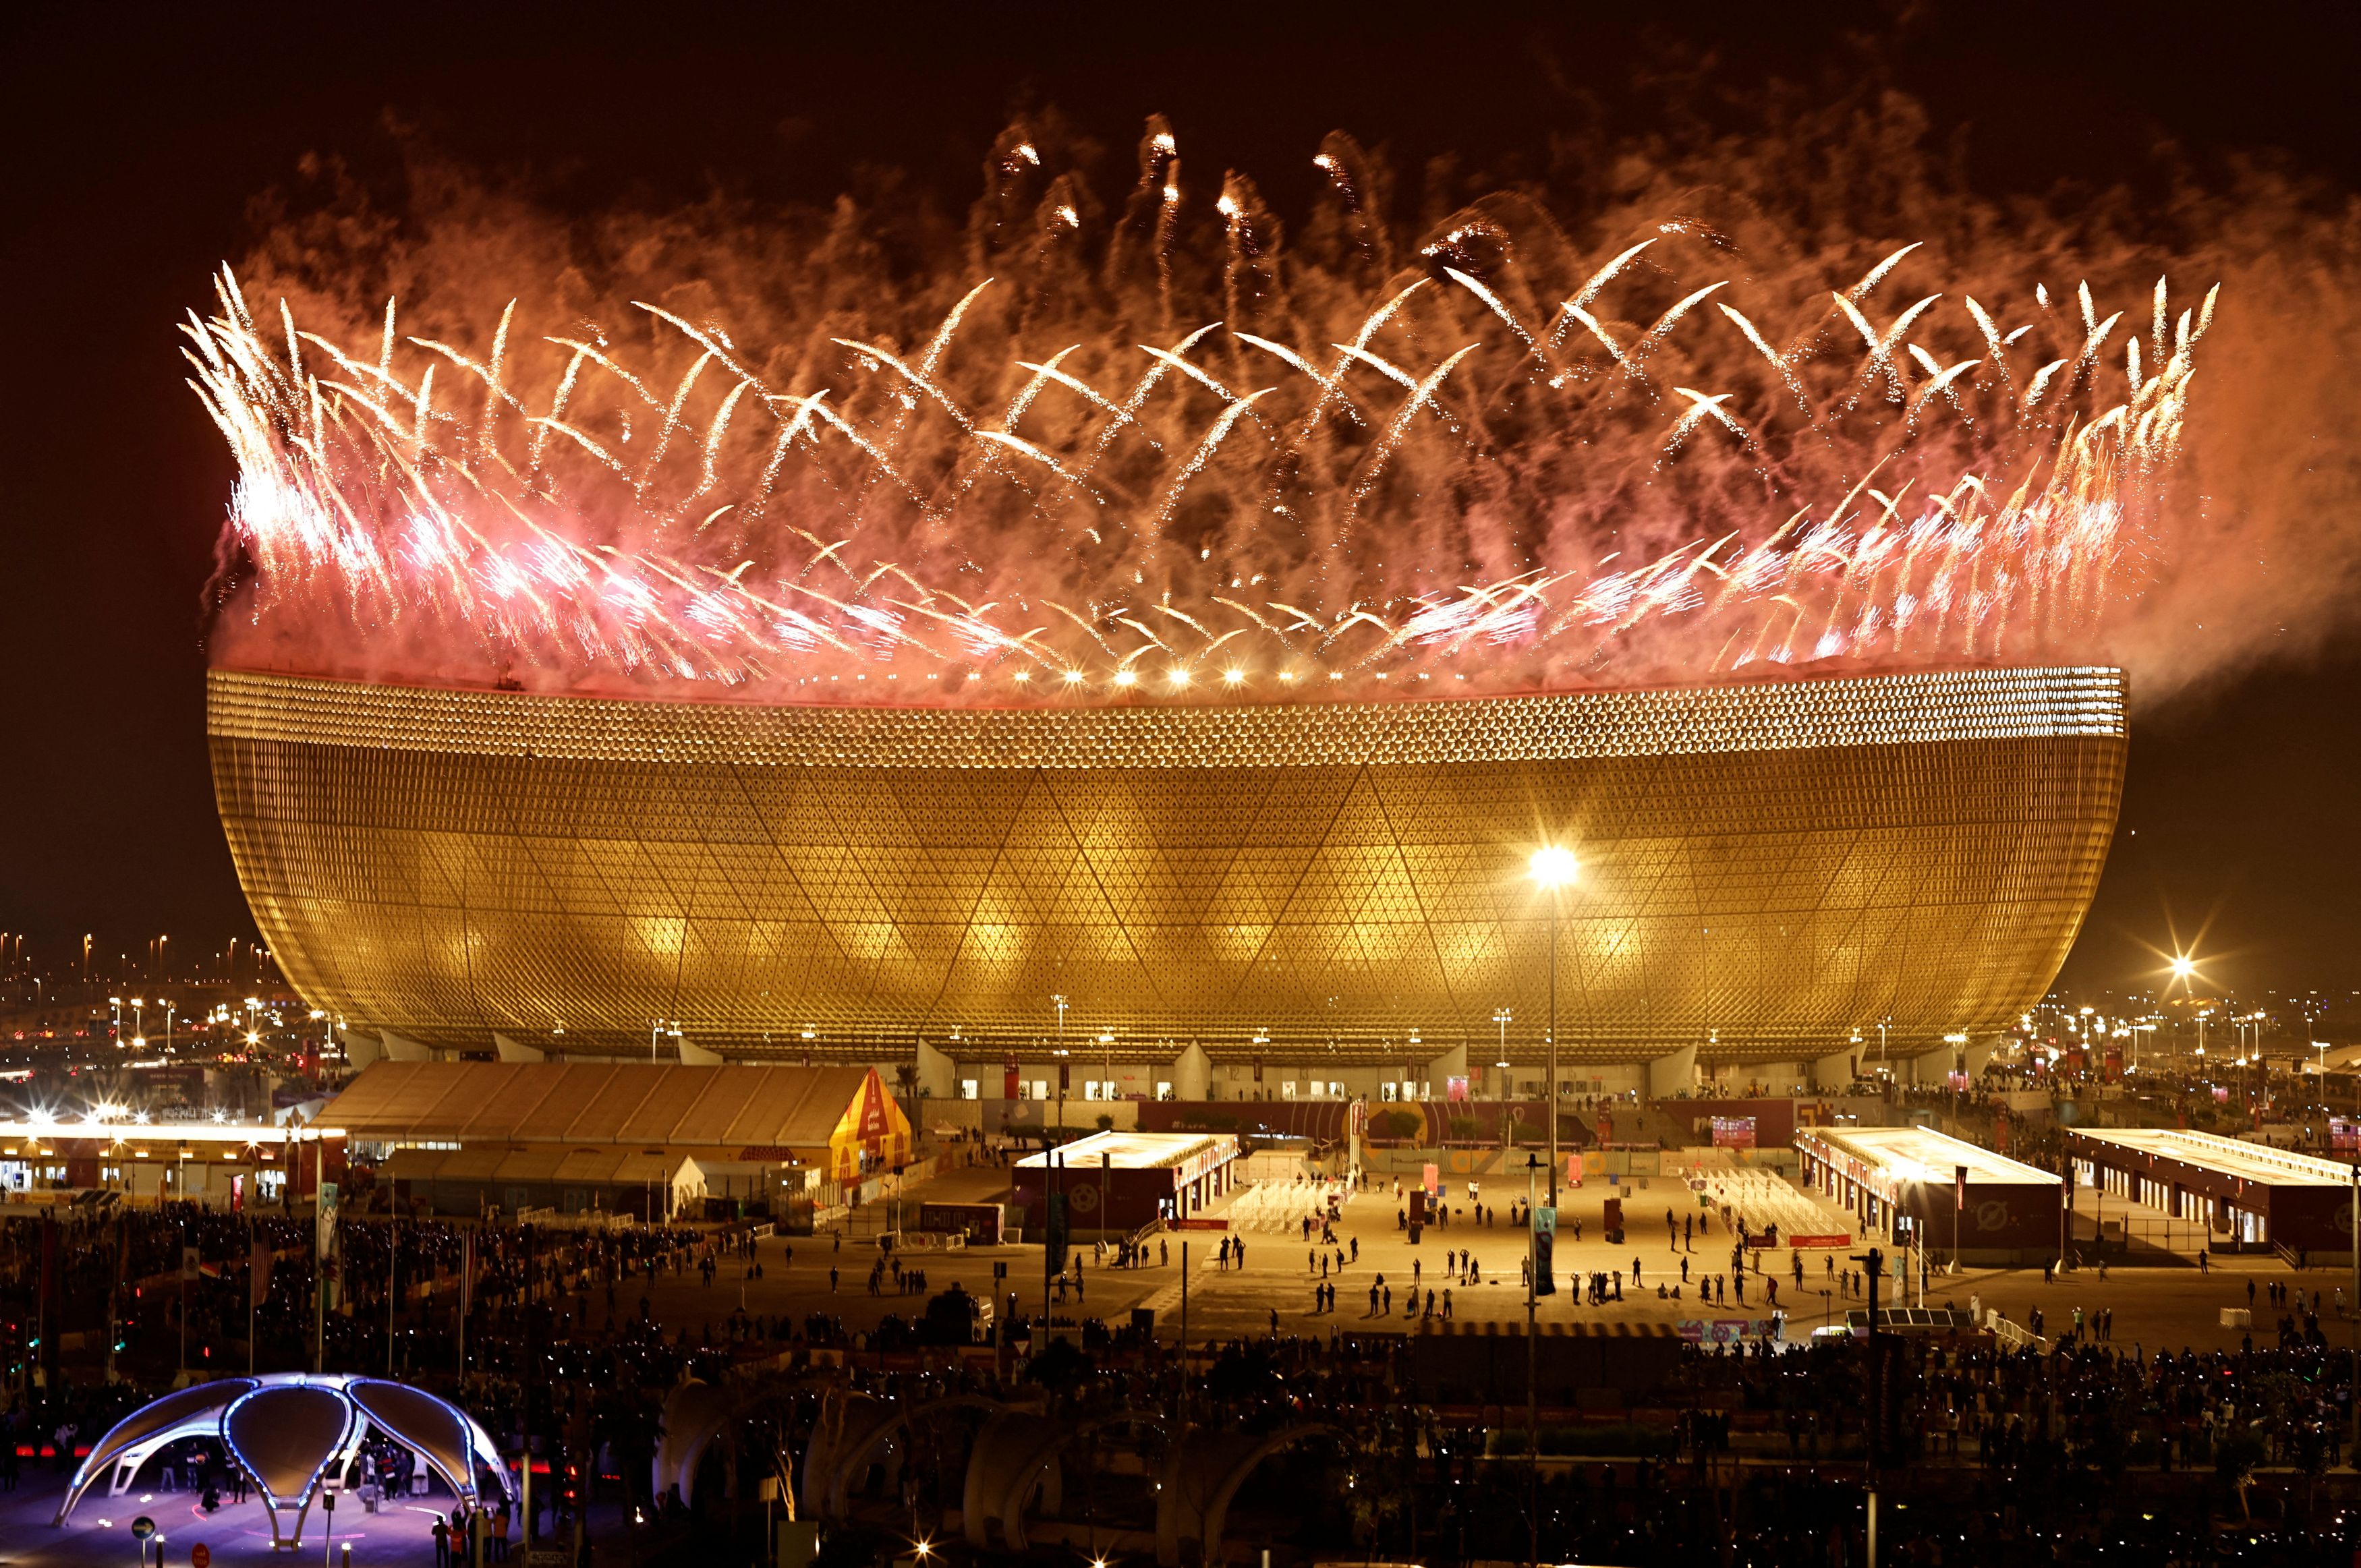 Soccer Football - FIFA World Cup Qatar 2022 - Final - Argentina v France - Lusail Stadium, Lusail, Qatar - December 18, 2022 General view of a pyrotechnic display pictured from outside the stadium after the match REUTERS/Hamad I Mohammed     TPX IMAGES OF THE DAY